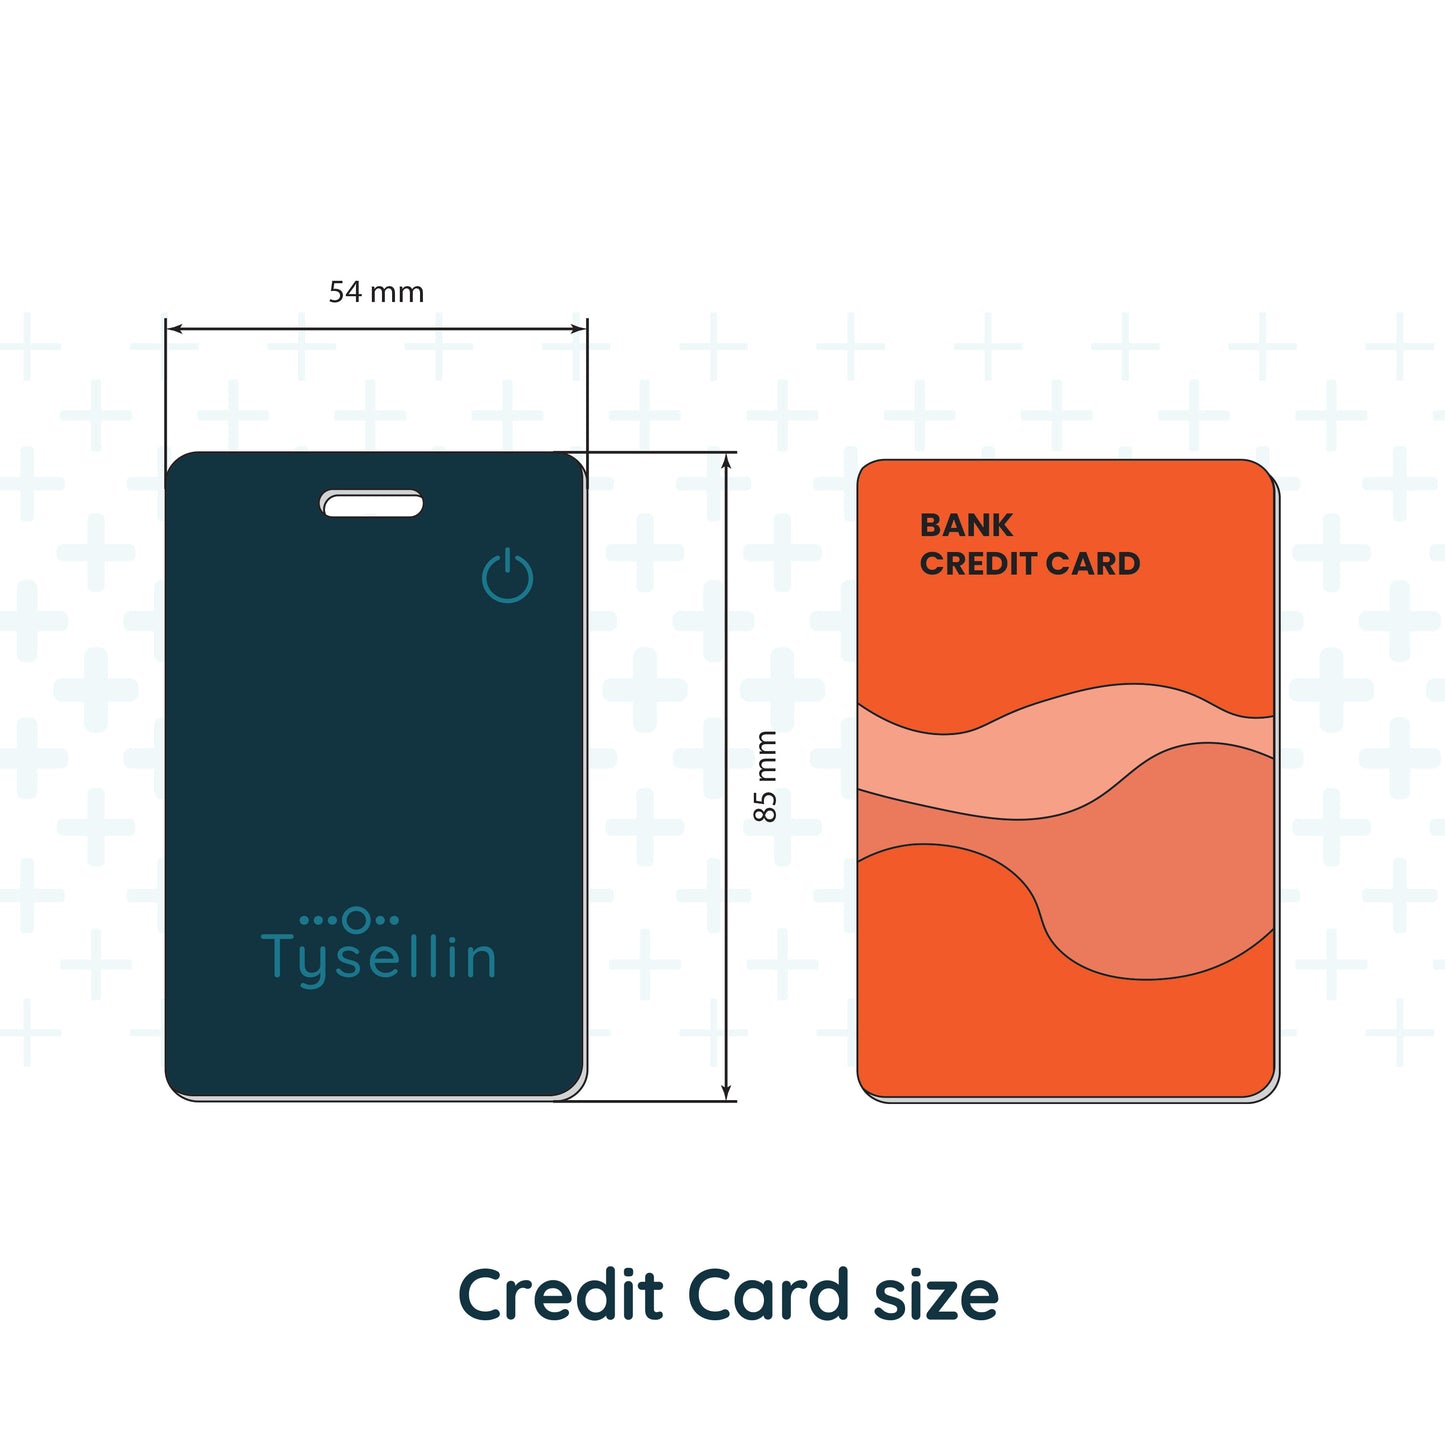 Tysellin CleverTag Card - FindMy Tracking Card